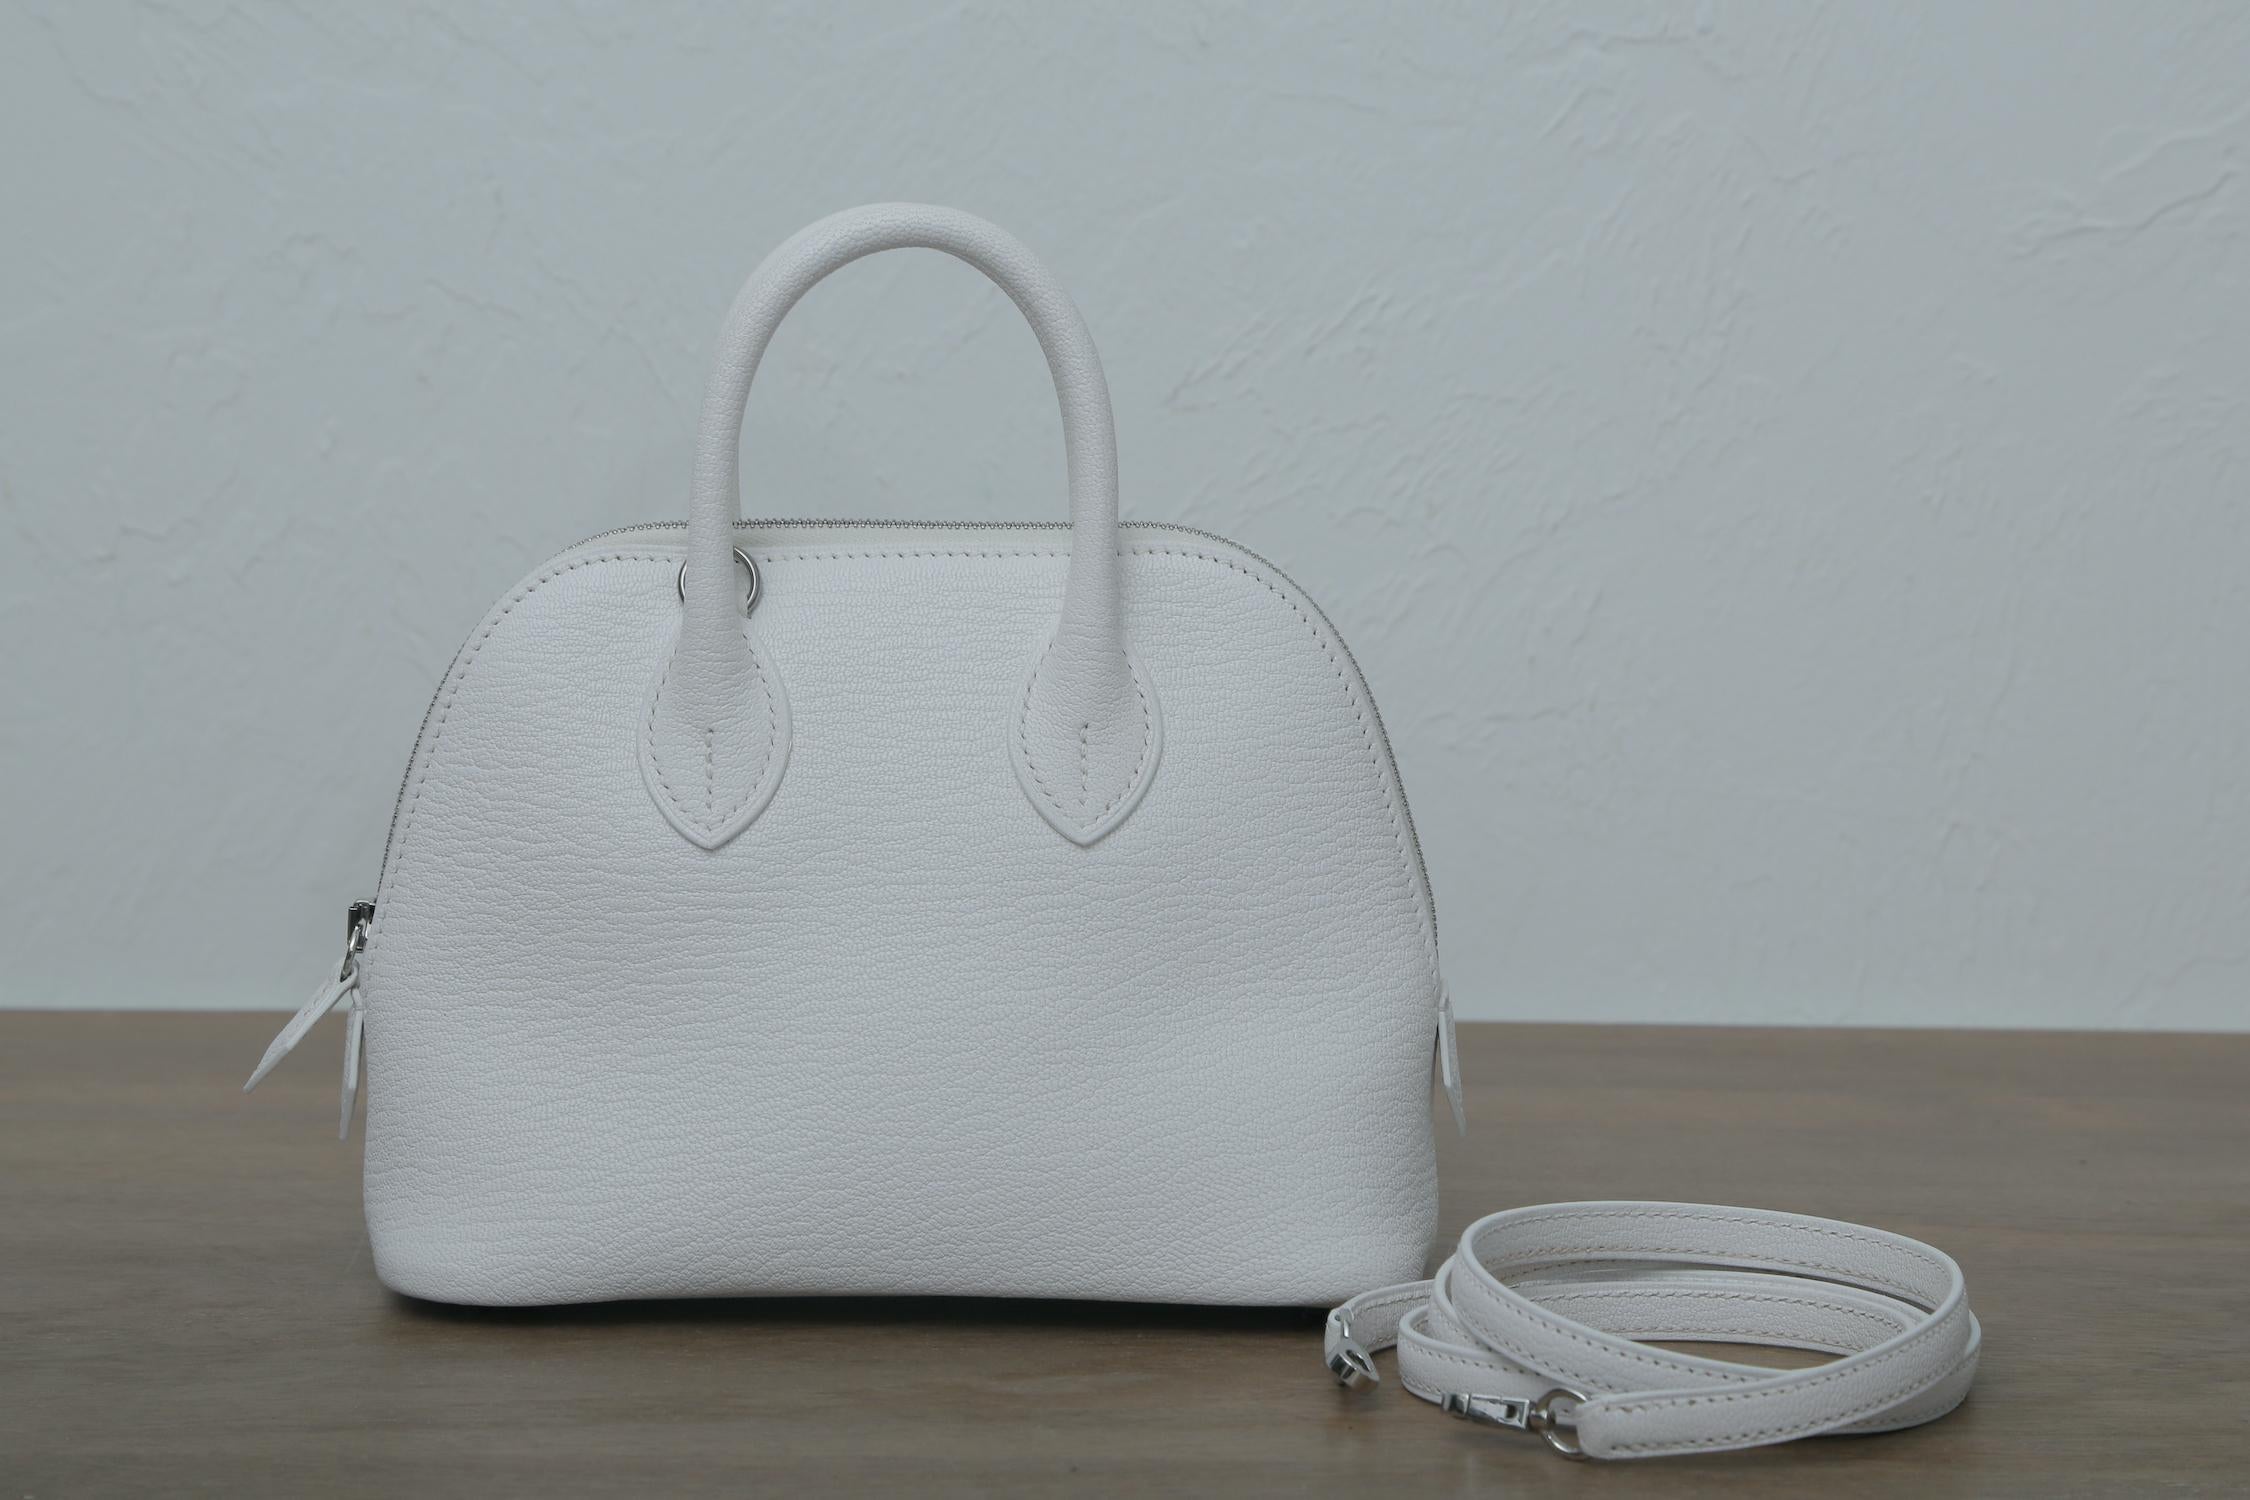 Hermes 2019 Mini Bolide White with Palladium Hardware with box and duster.